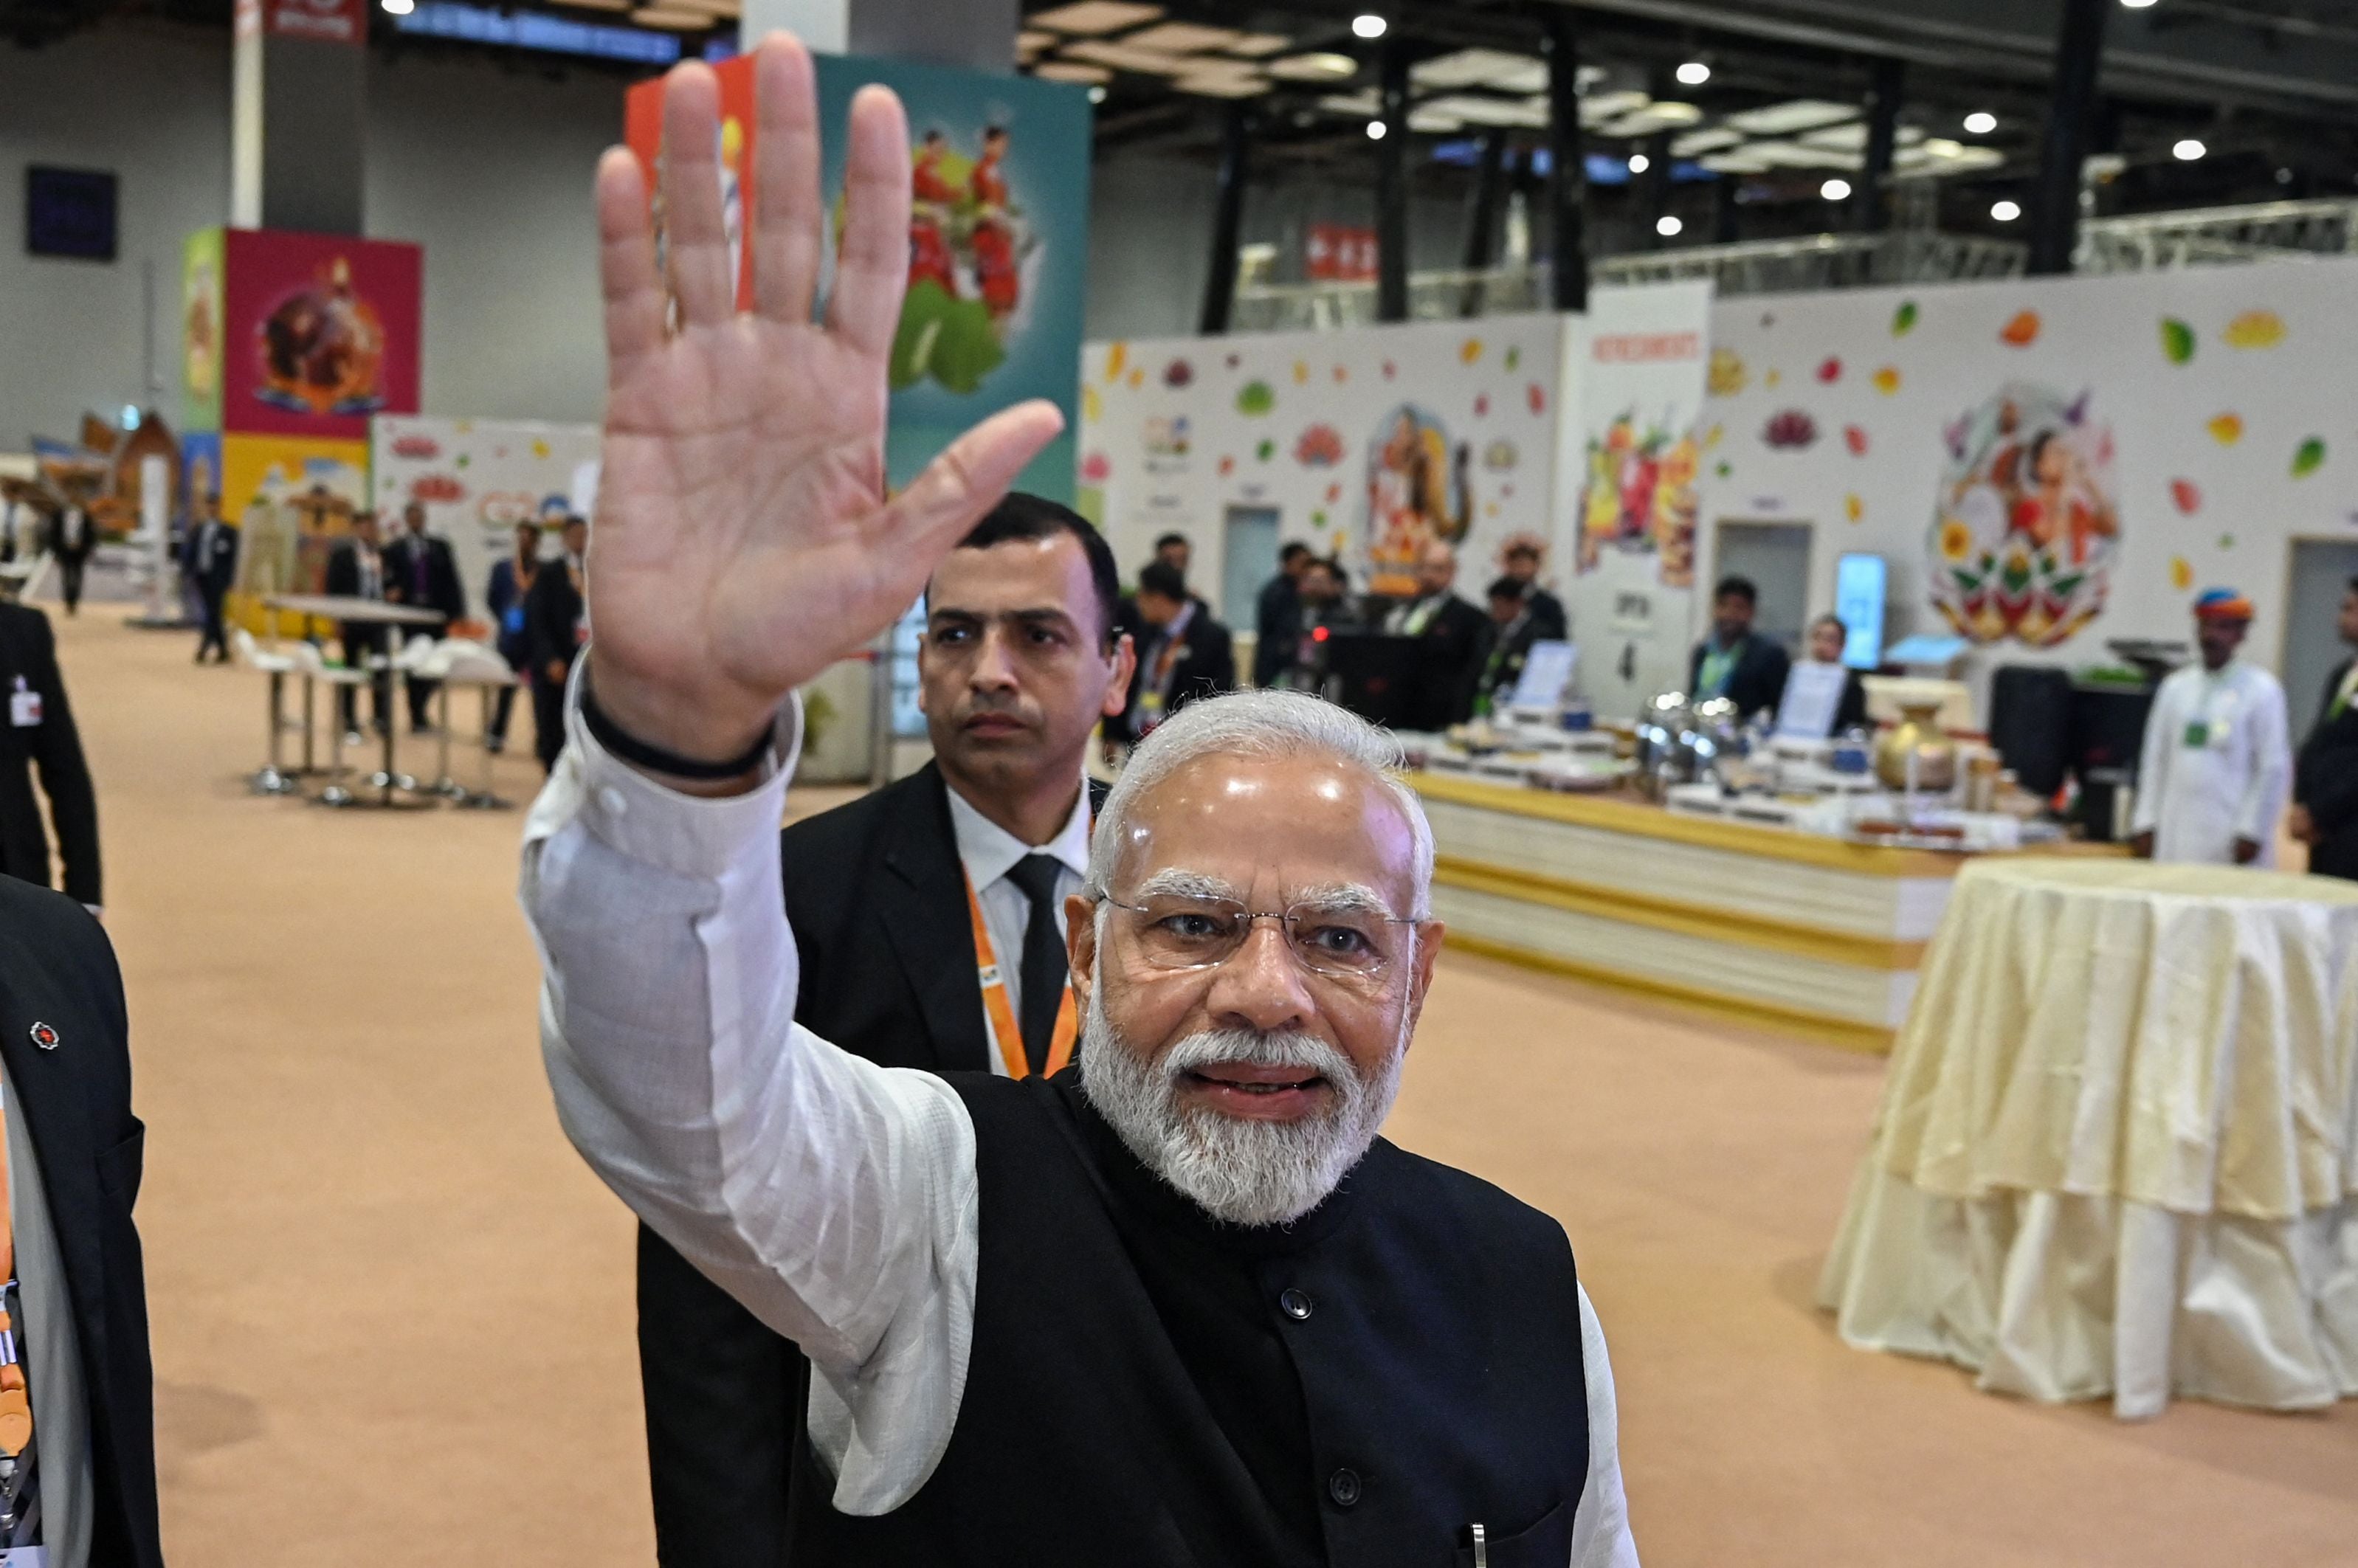 India's Prime Minister Narendra Modi (C) waves to the media during his visit to the International media centre, at the G20 summit venue